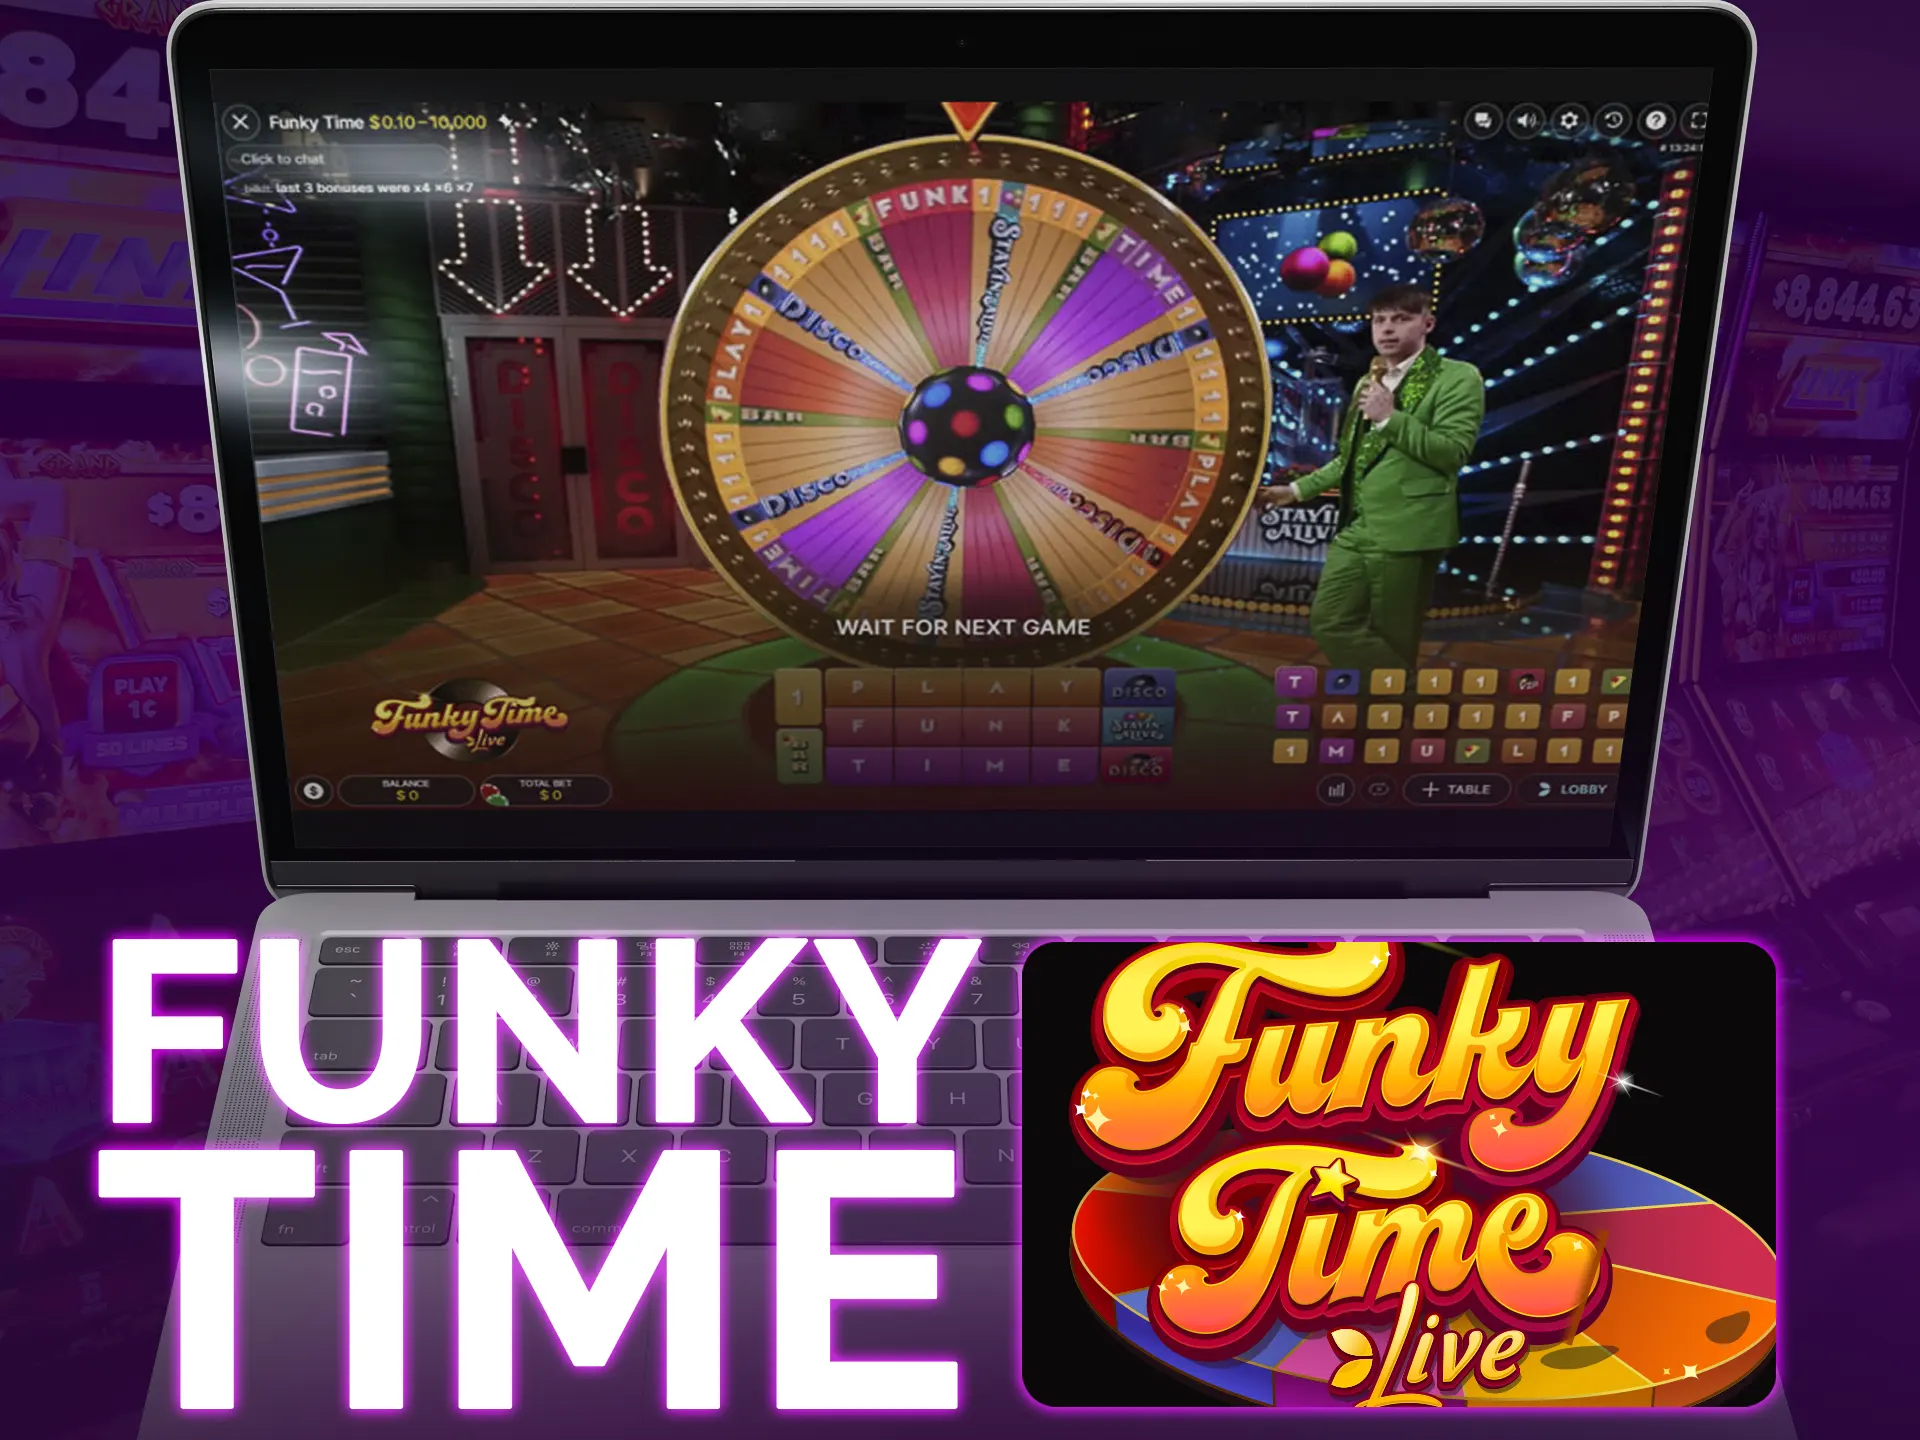 Play Funky Time - live dealer game in a vibrant studio with a wheel of fortune.